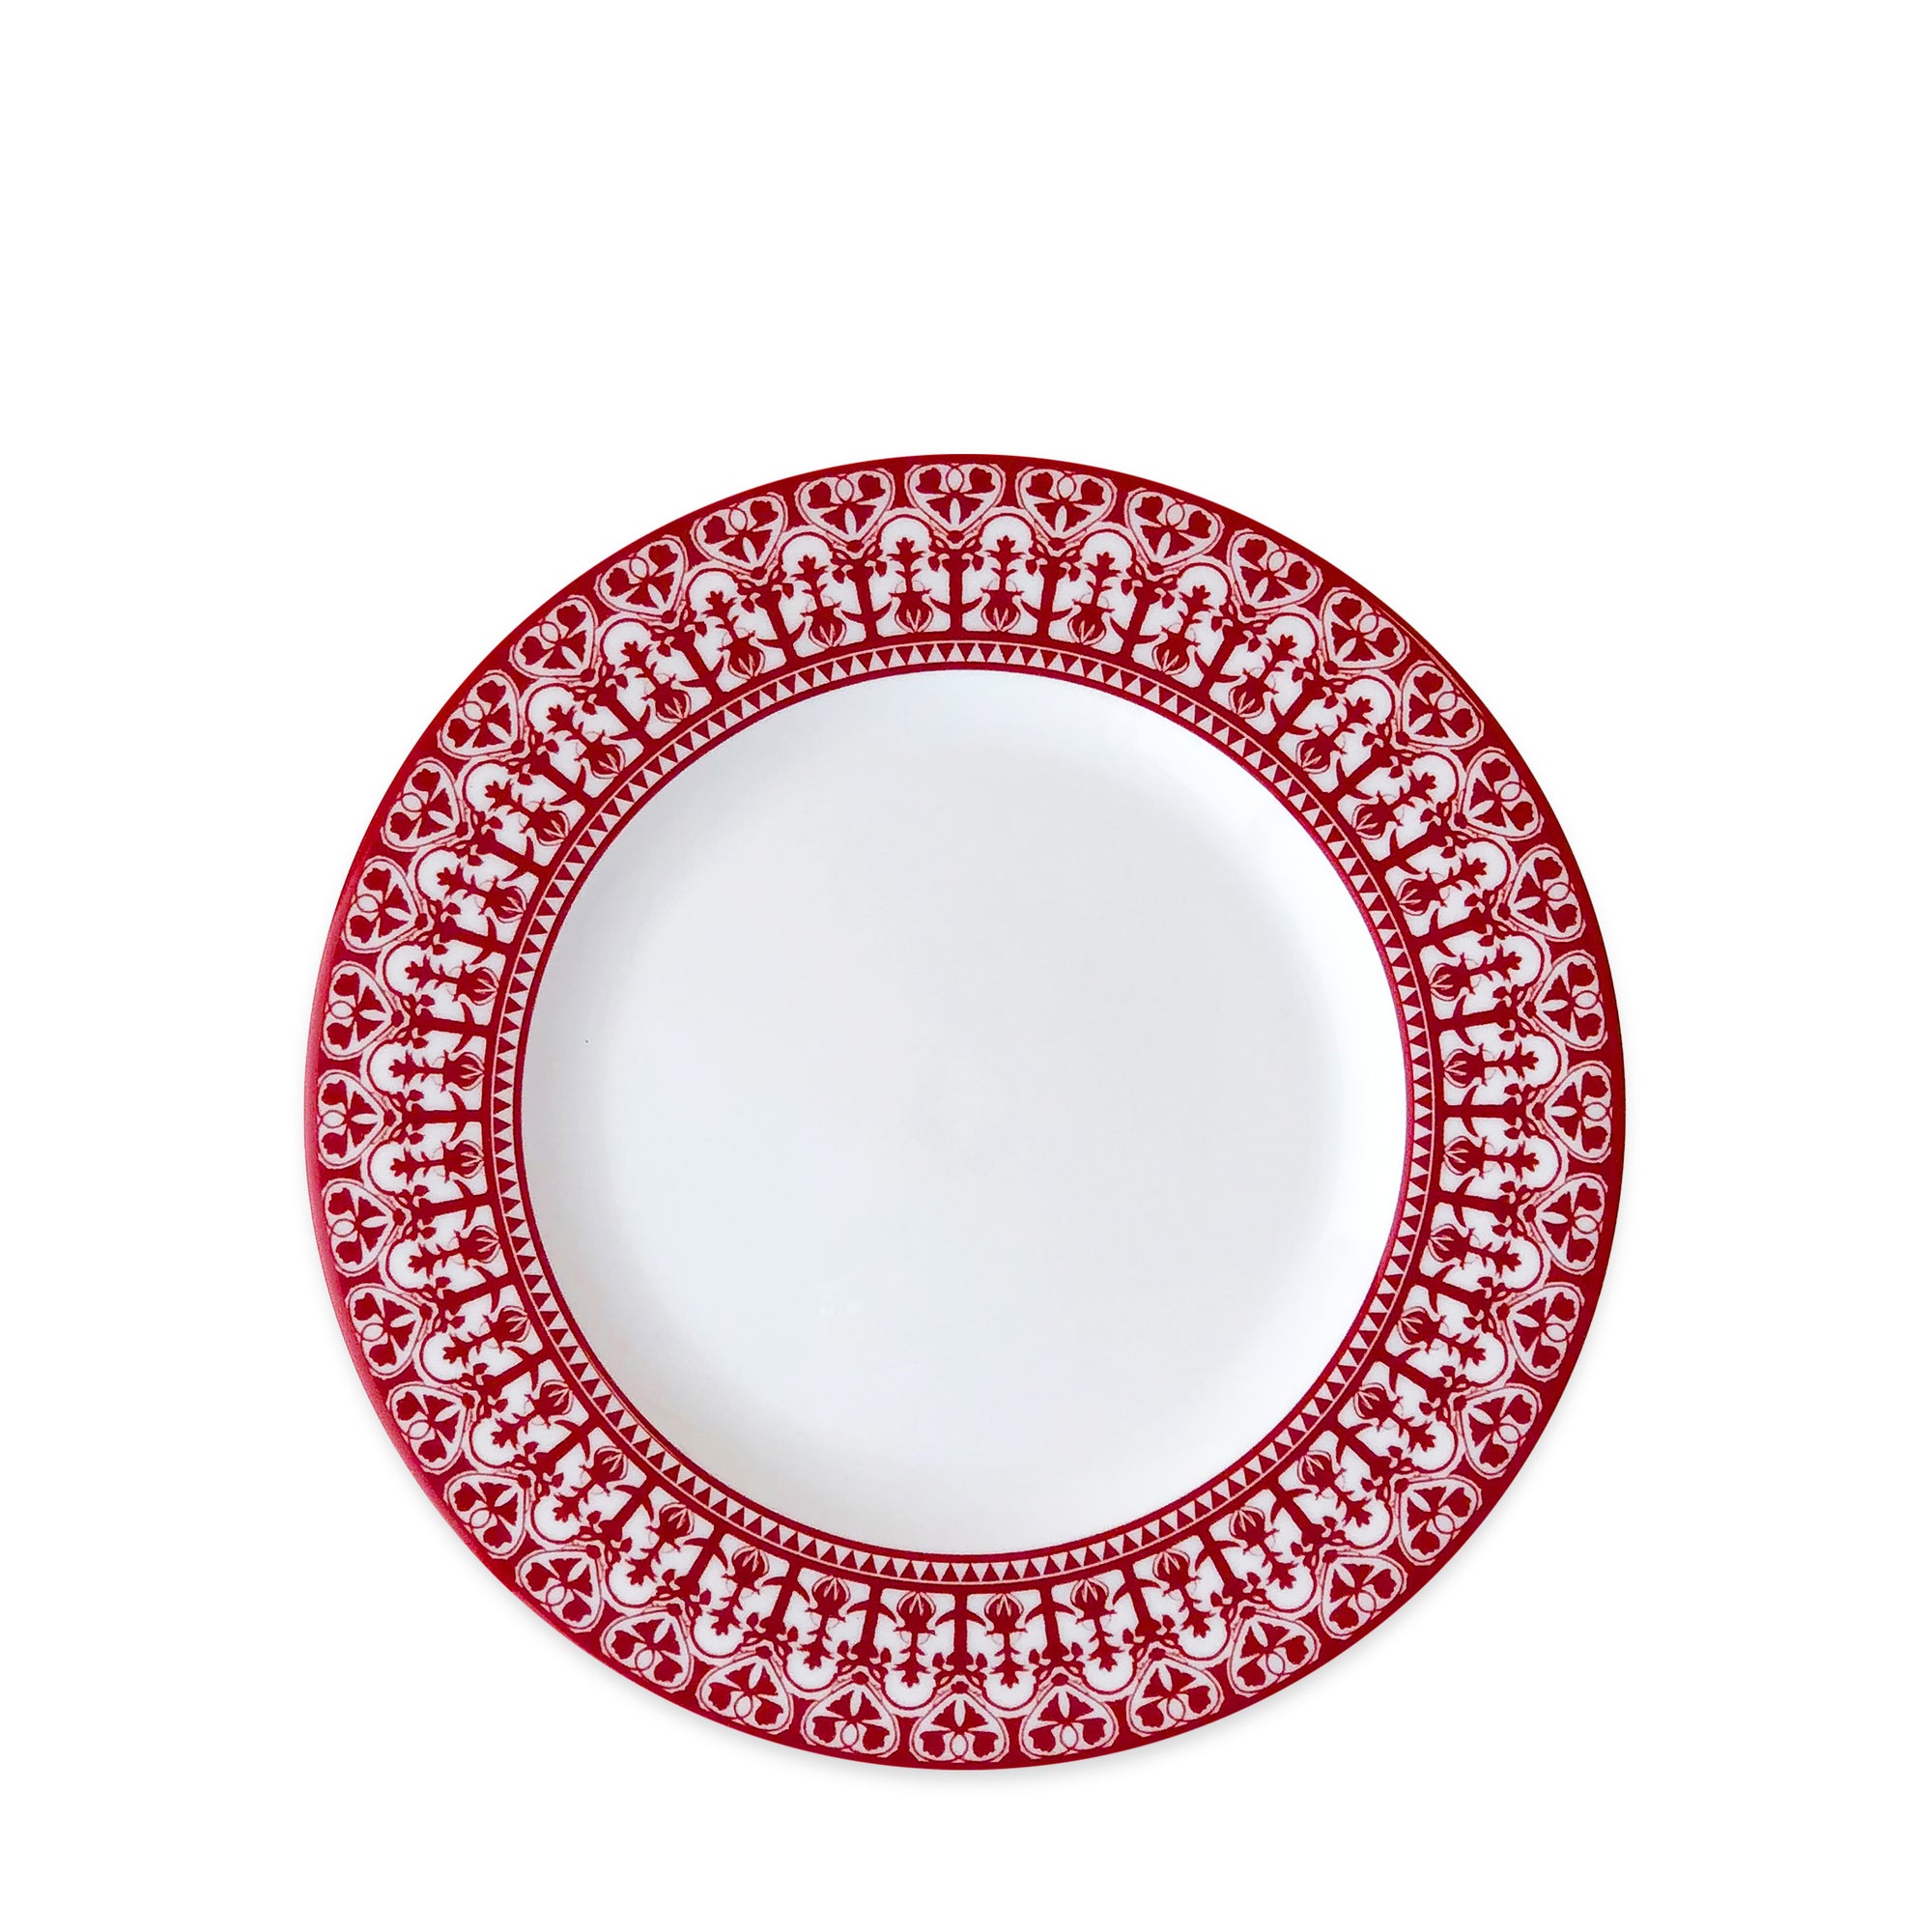 Casablanca Crimson Red and white high fired porcelain salad plate from Caskata